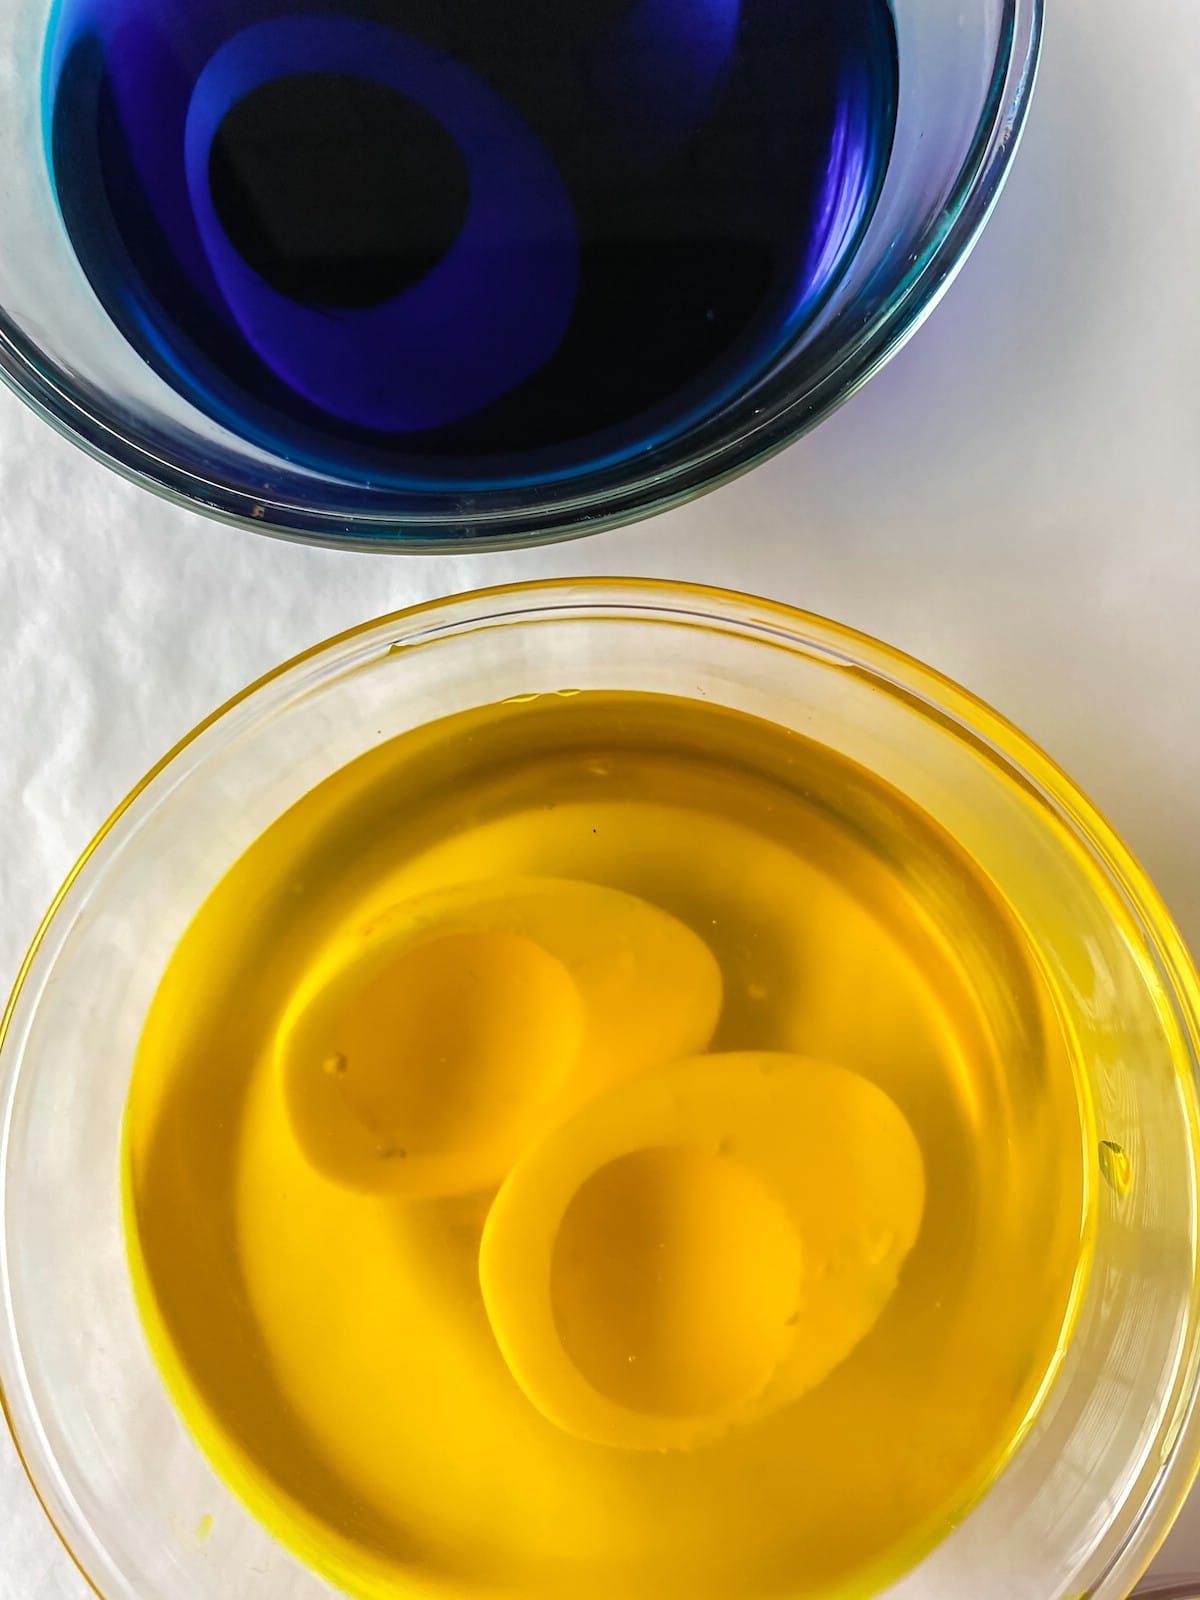 Eggs in bowls with blue and yellow dye